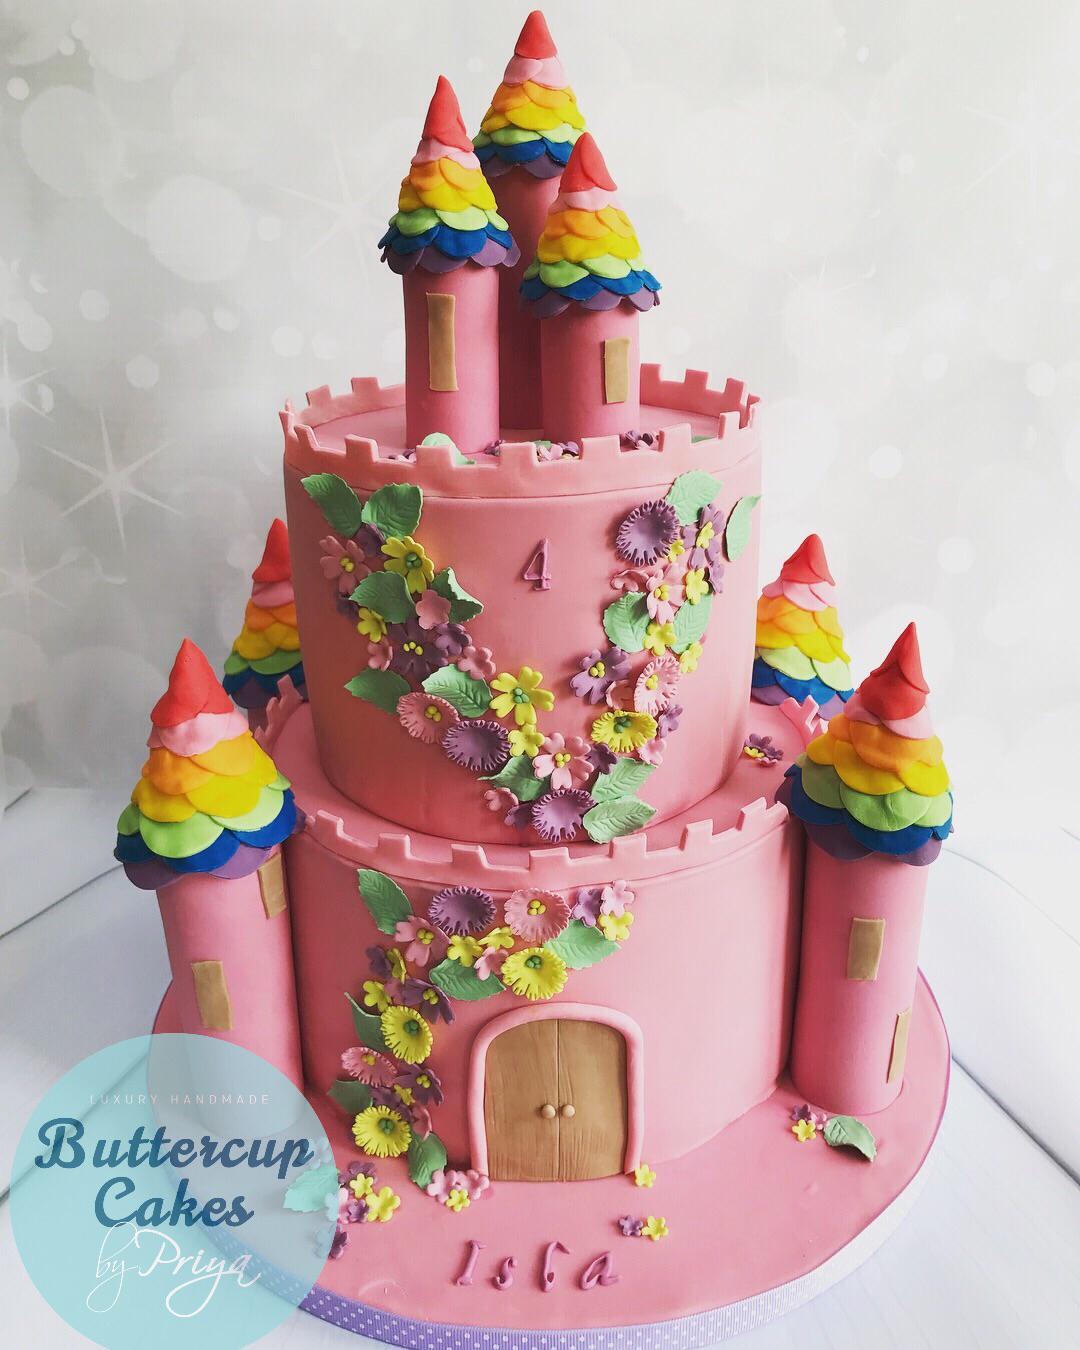 Buttercup Cakes by Priya_Pink Castle Birthday Cake for 4 year old